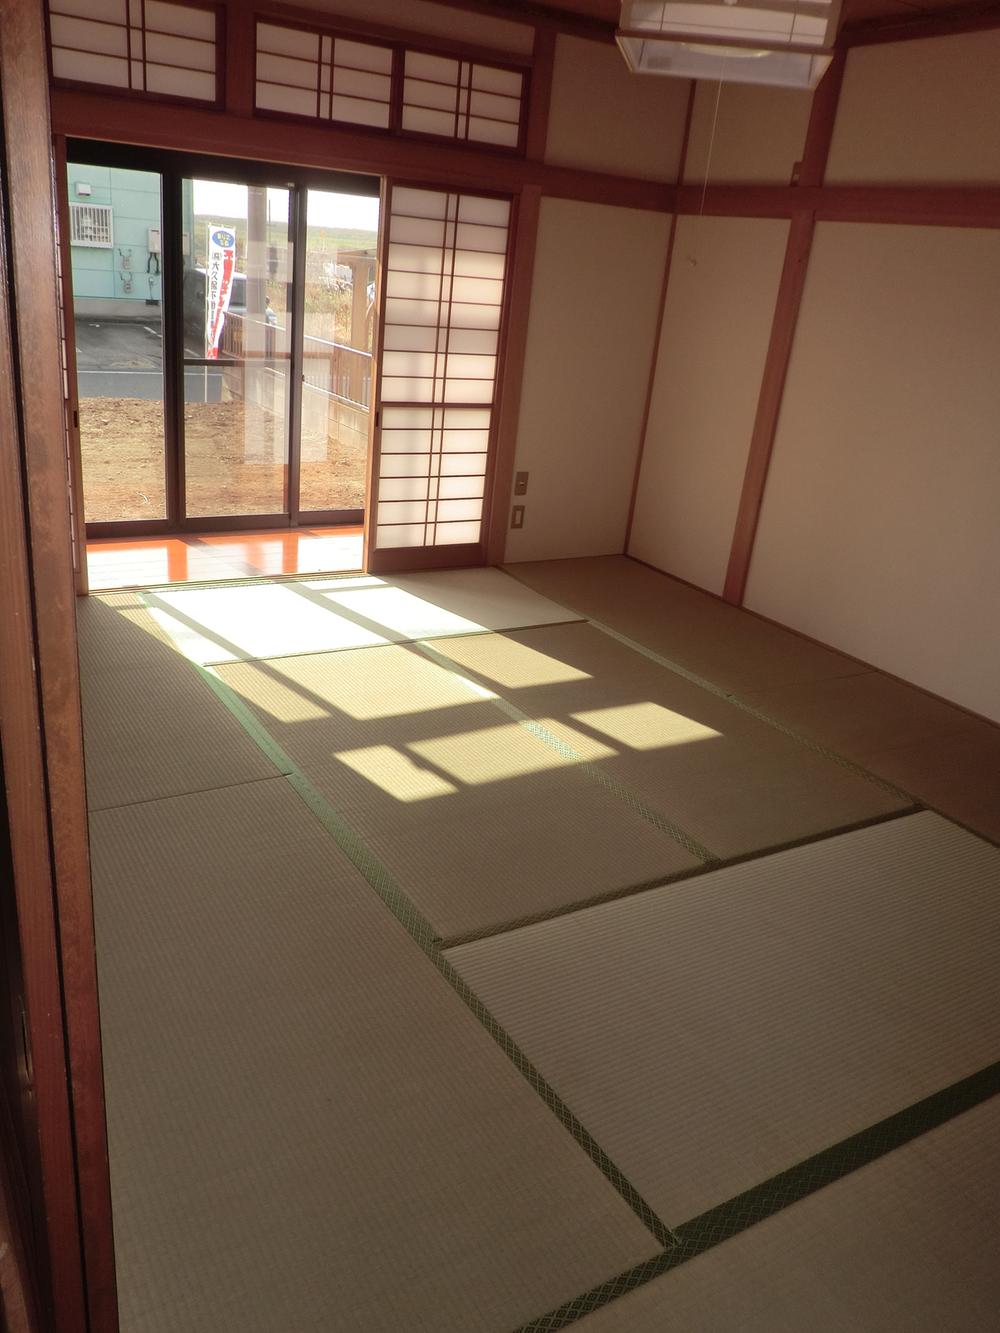 Other introspection. I was also happy to look after a long time. 10 is the Pledge of Japanese-style room. We also very particular about the ceiling of the decoration. It is Makabe Japanese-style room with a Yukimi Shoji. Certainly please see once (^ O ^) / 